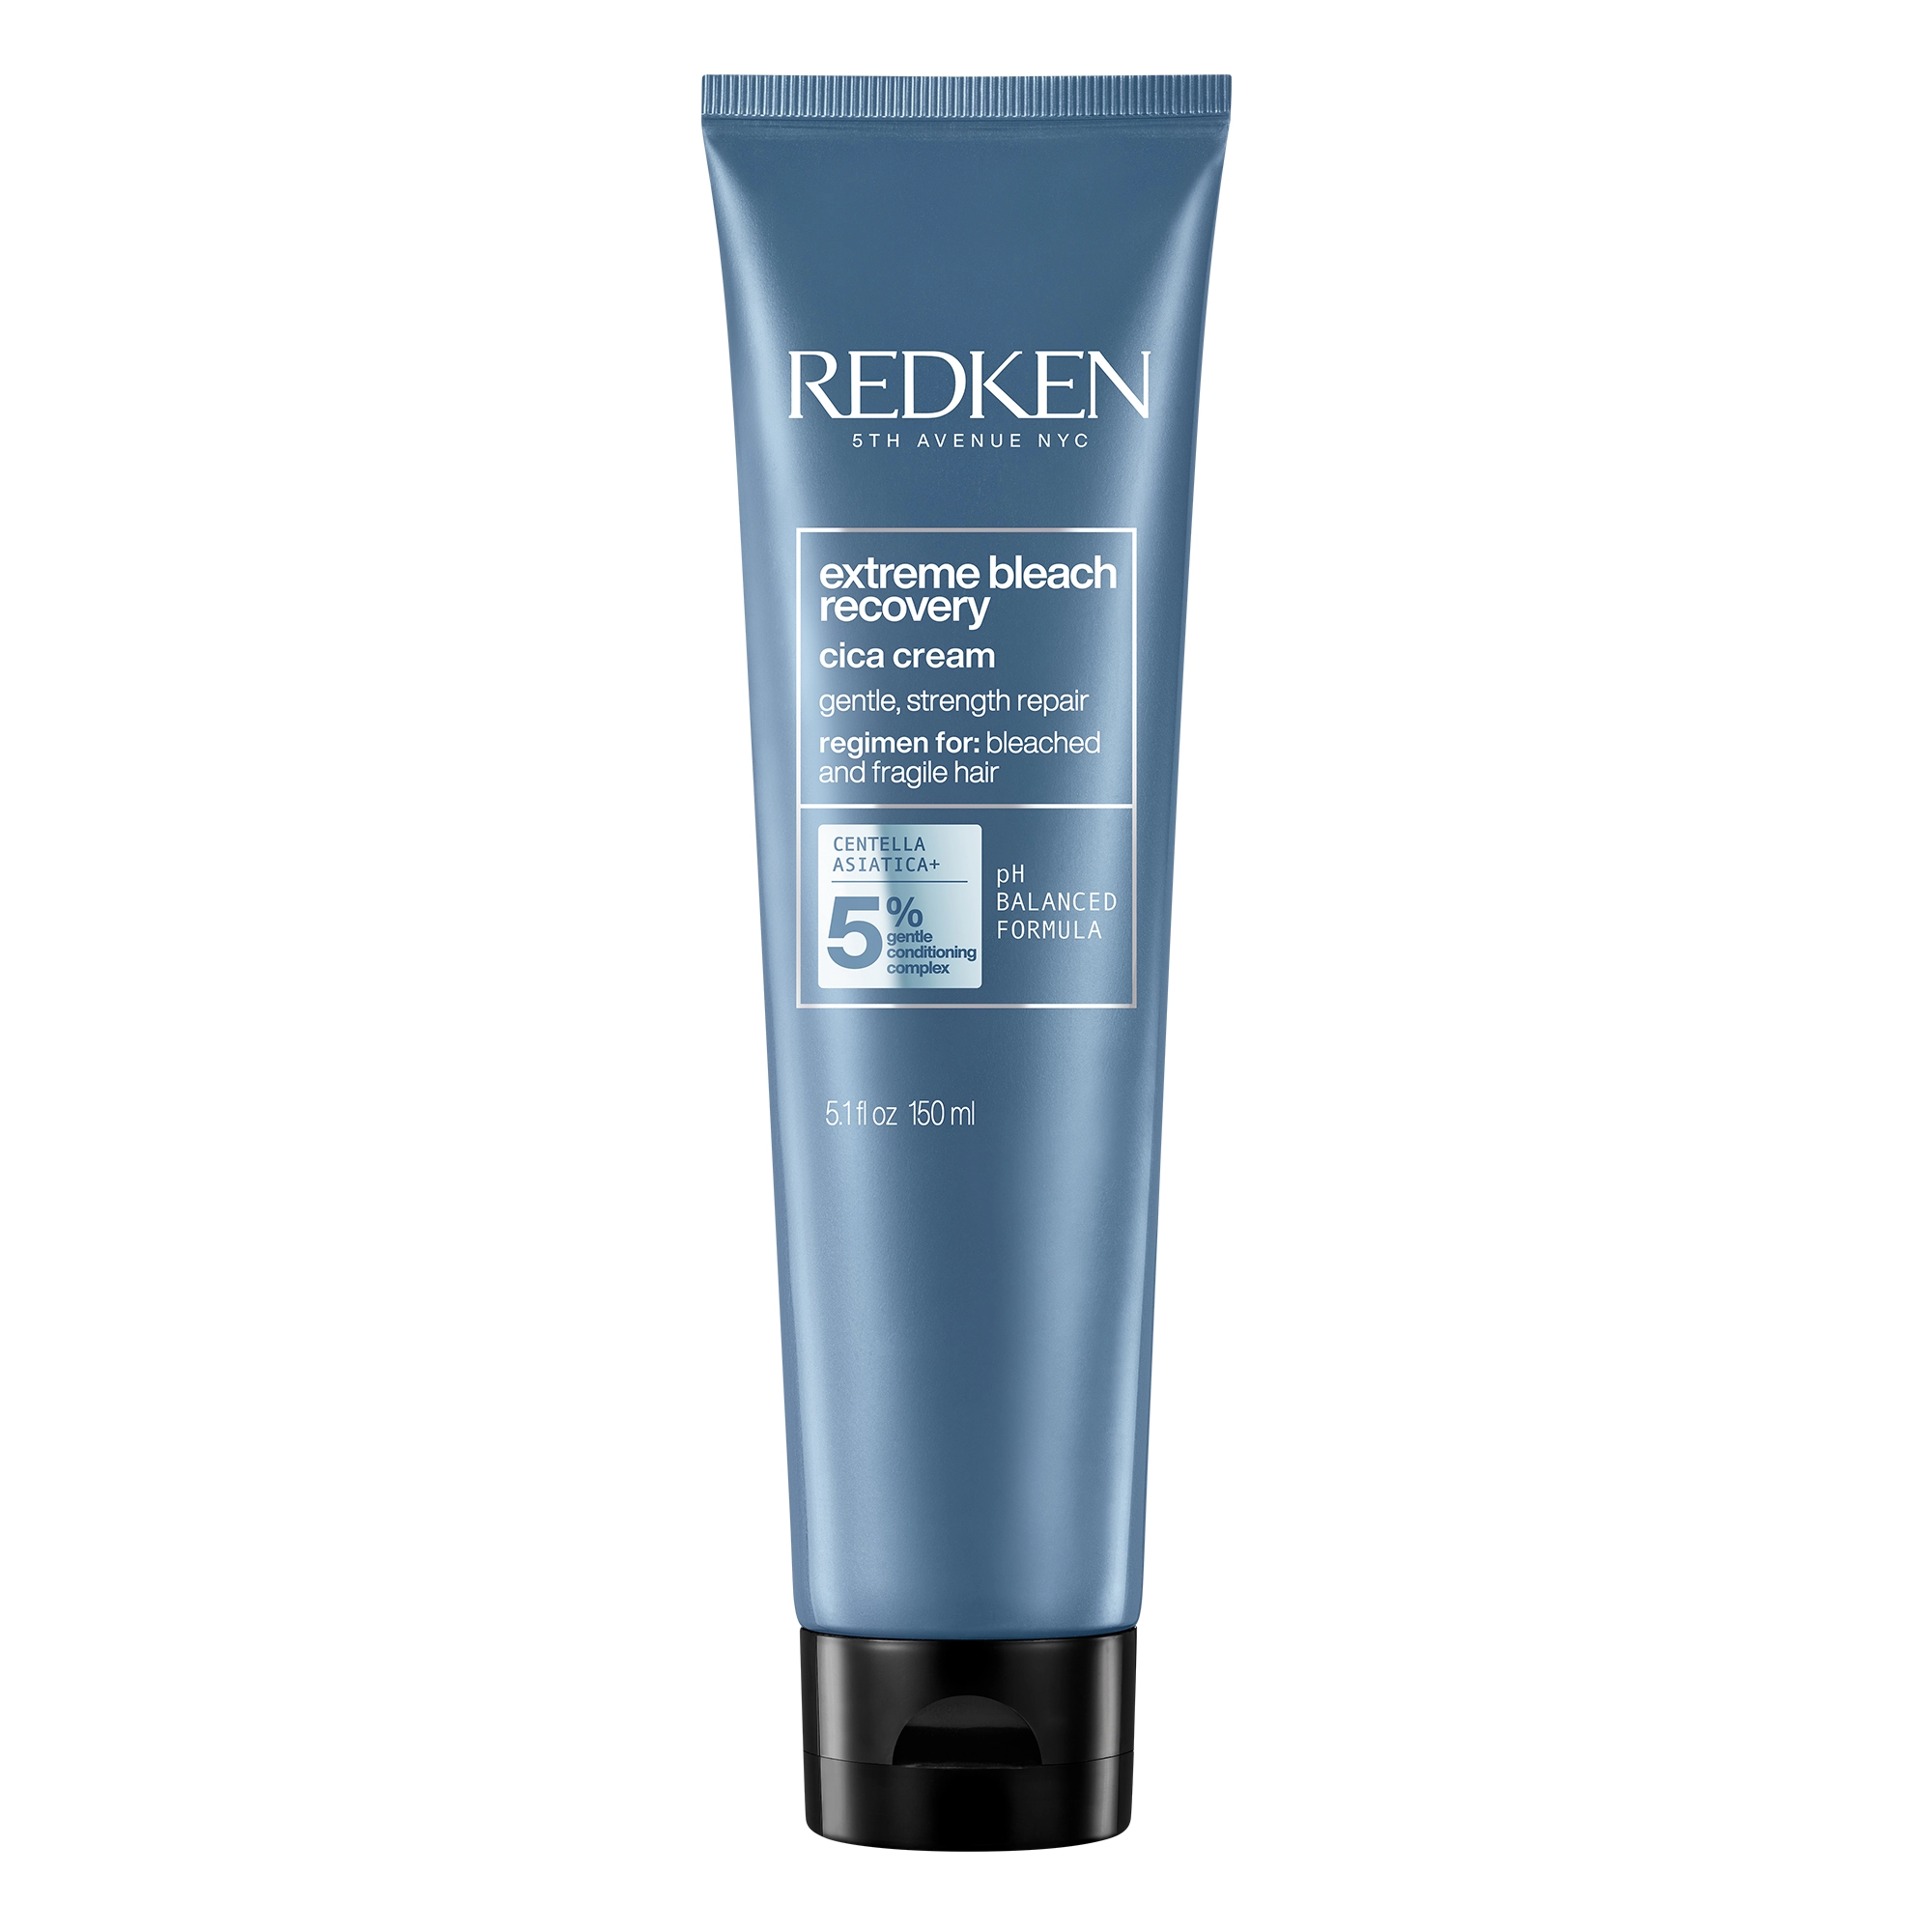 Redken 2020 Extreme Bleach Recovery Cica Cream Product Shot 2000x2000 1 jpg